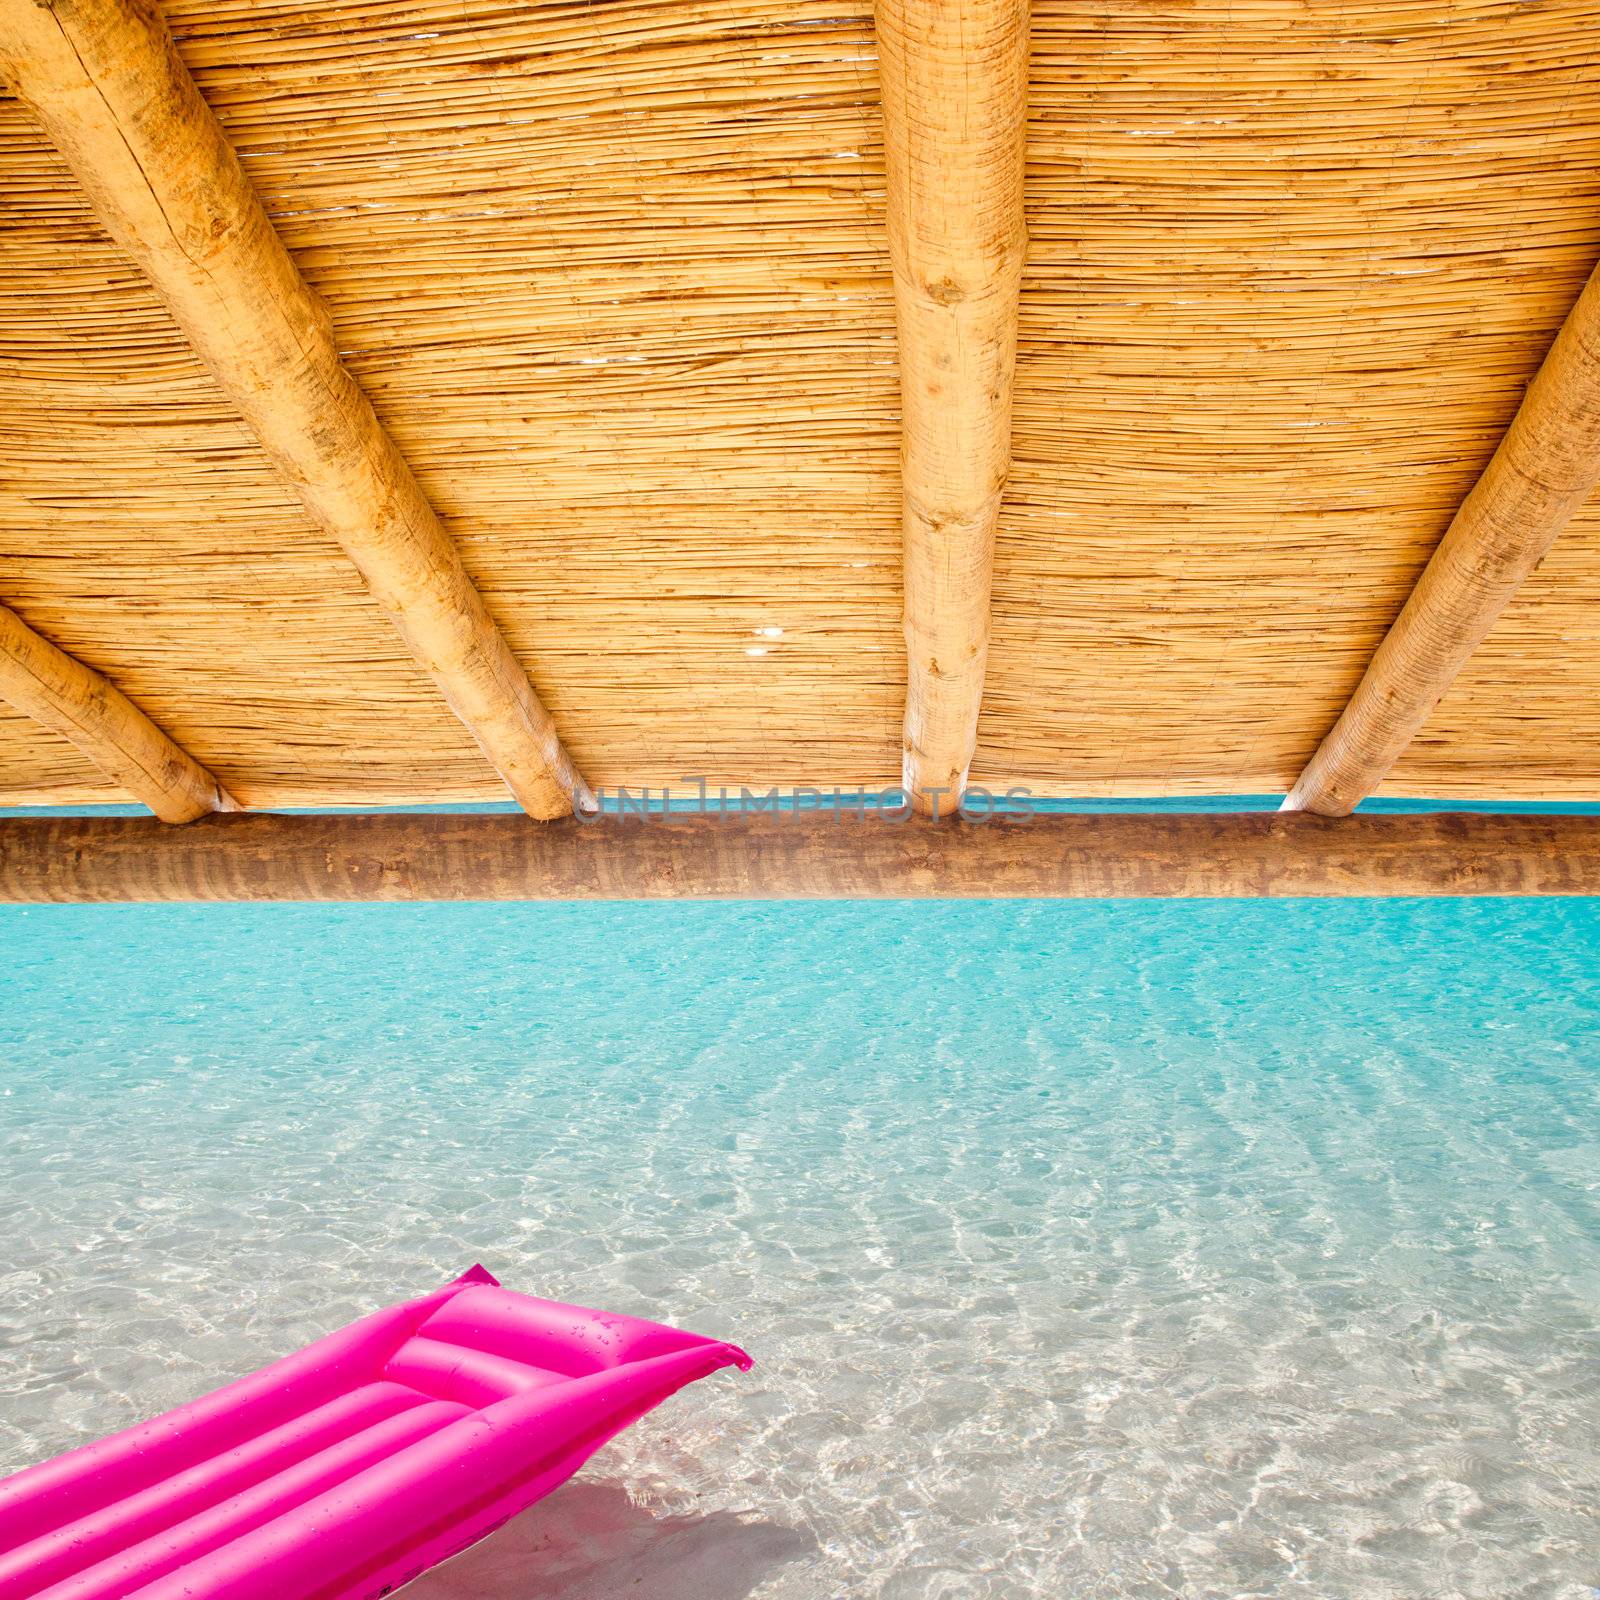 Cane sunroof with tropical perfect beach and pink float